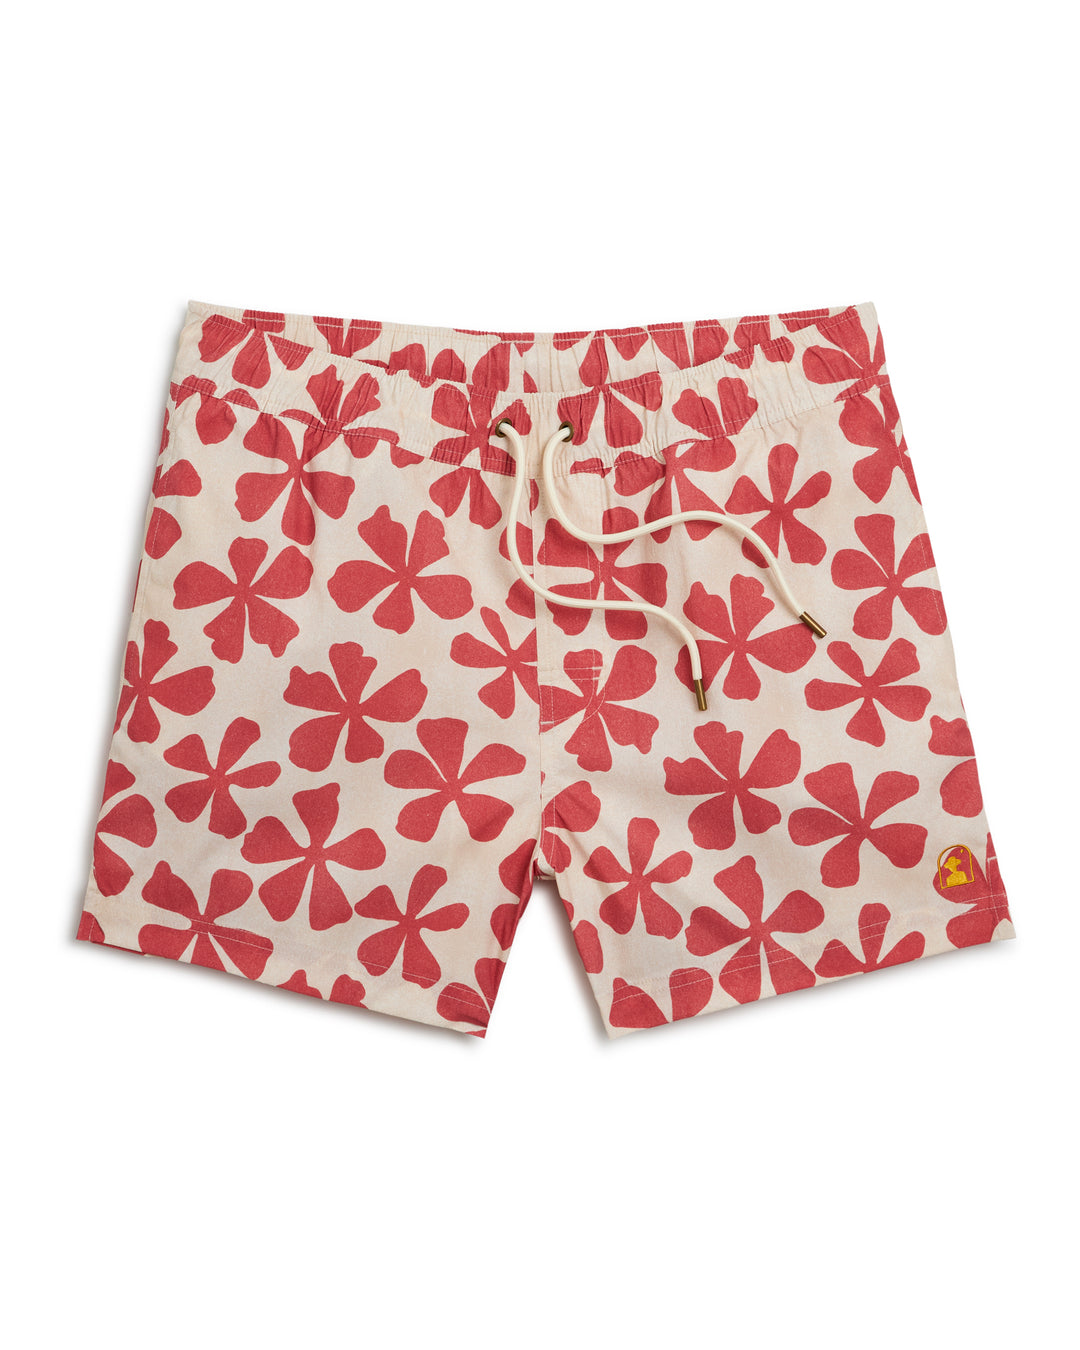 A Dandy Del Mar red and white floral print Ventura Volley Short - Currant swim trunks.